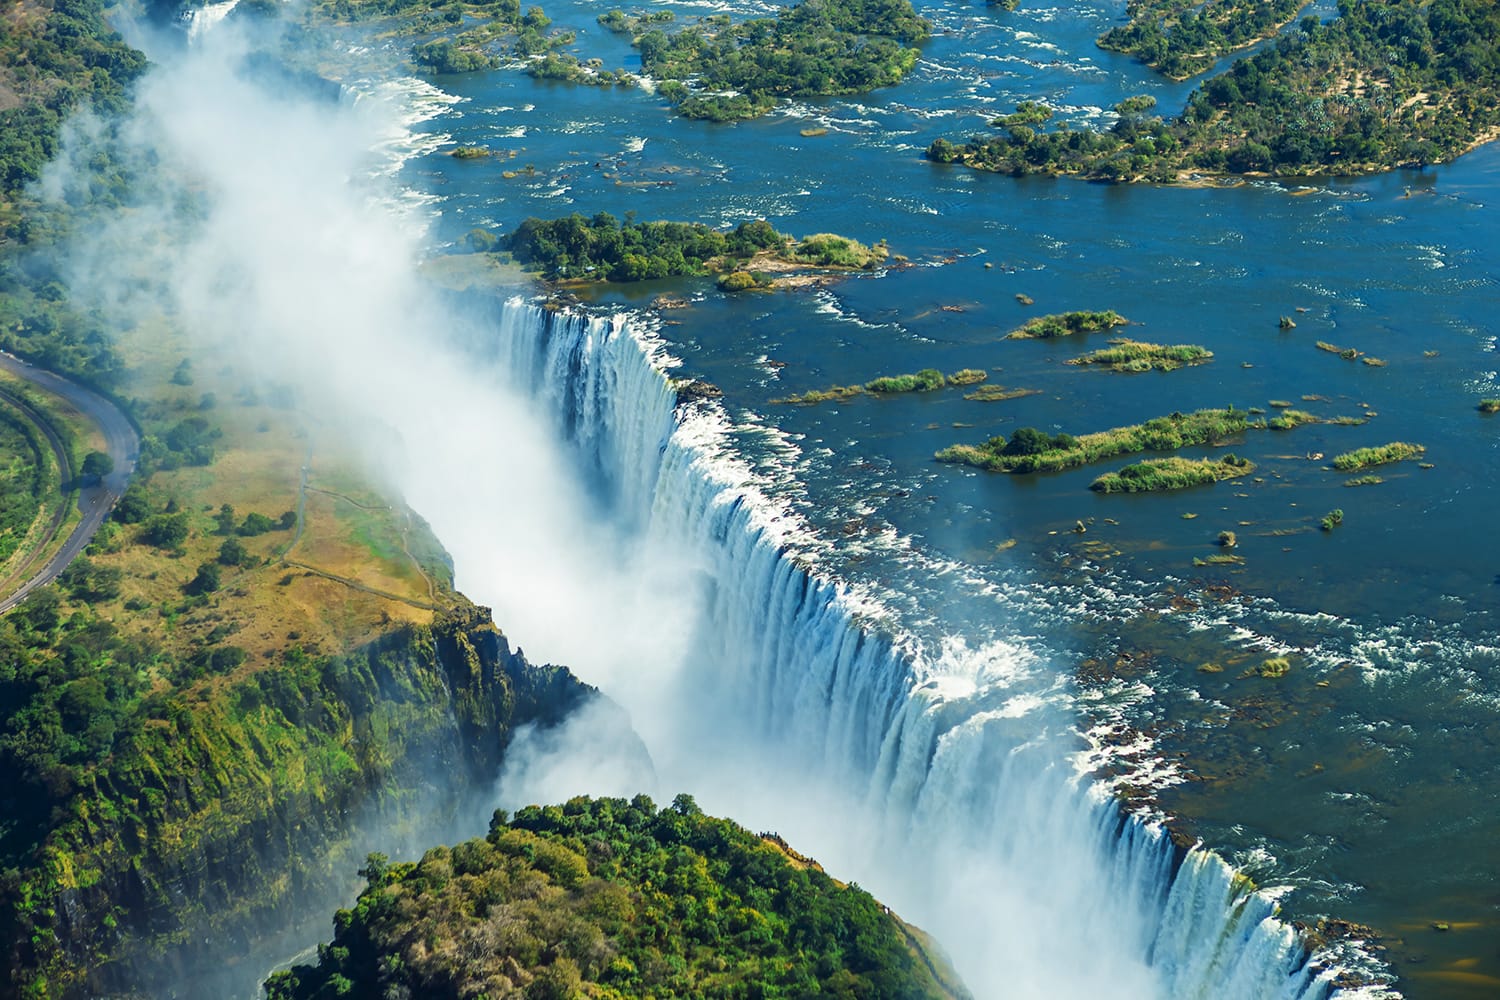 Iguazu Falls - The Waterfall That Is Shared Between Brazil And Argentina